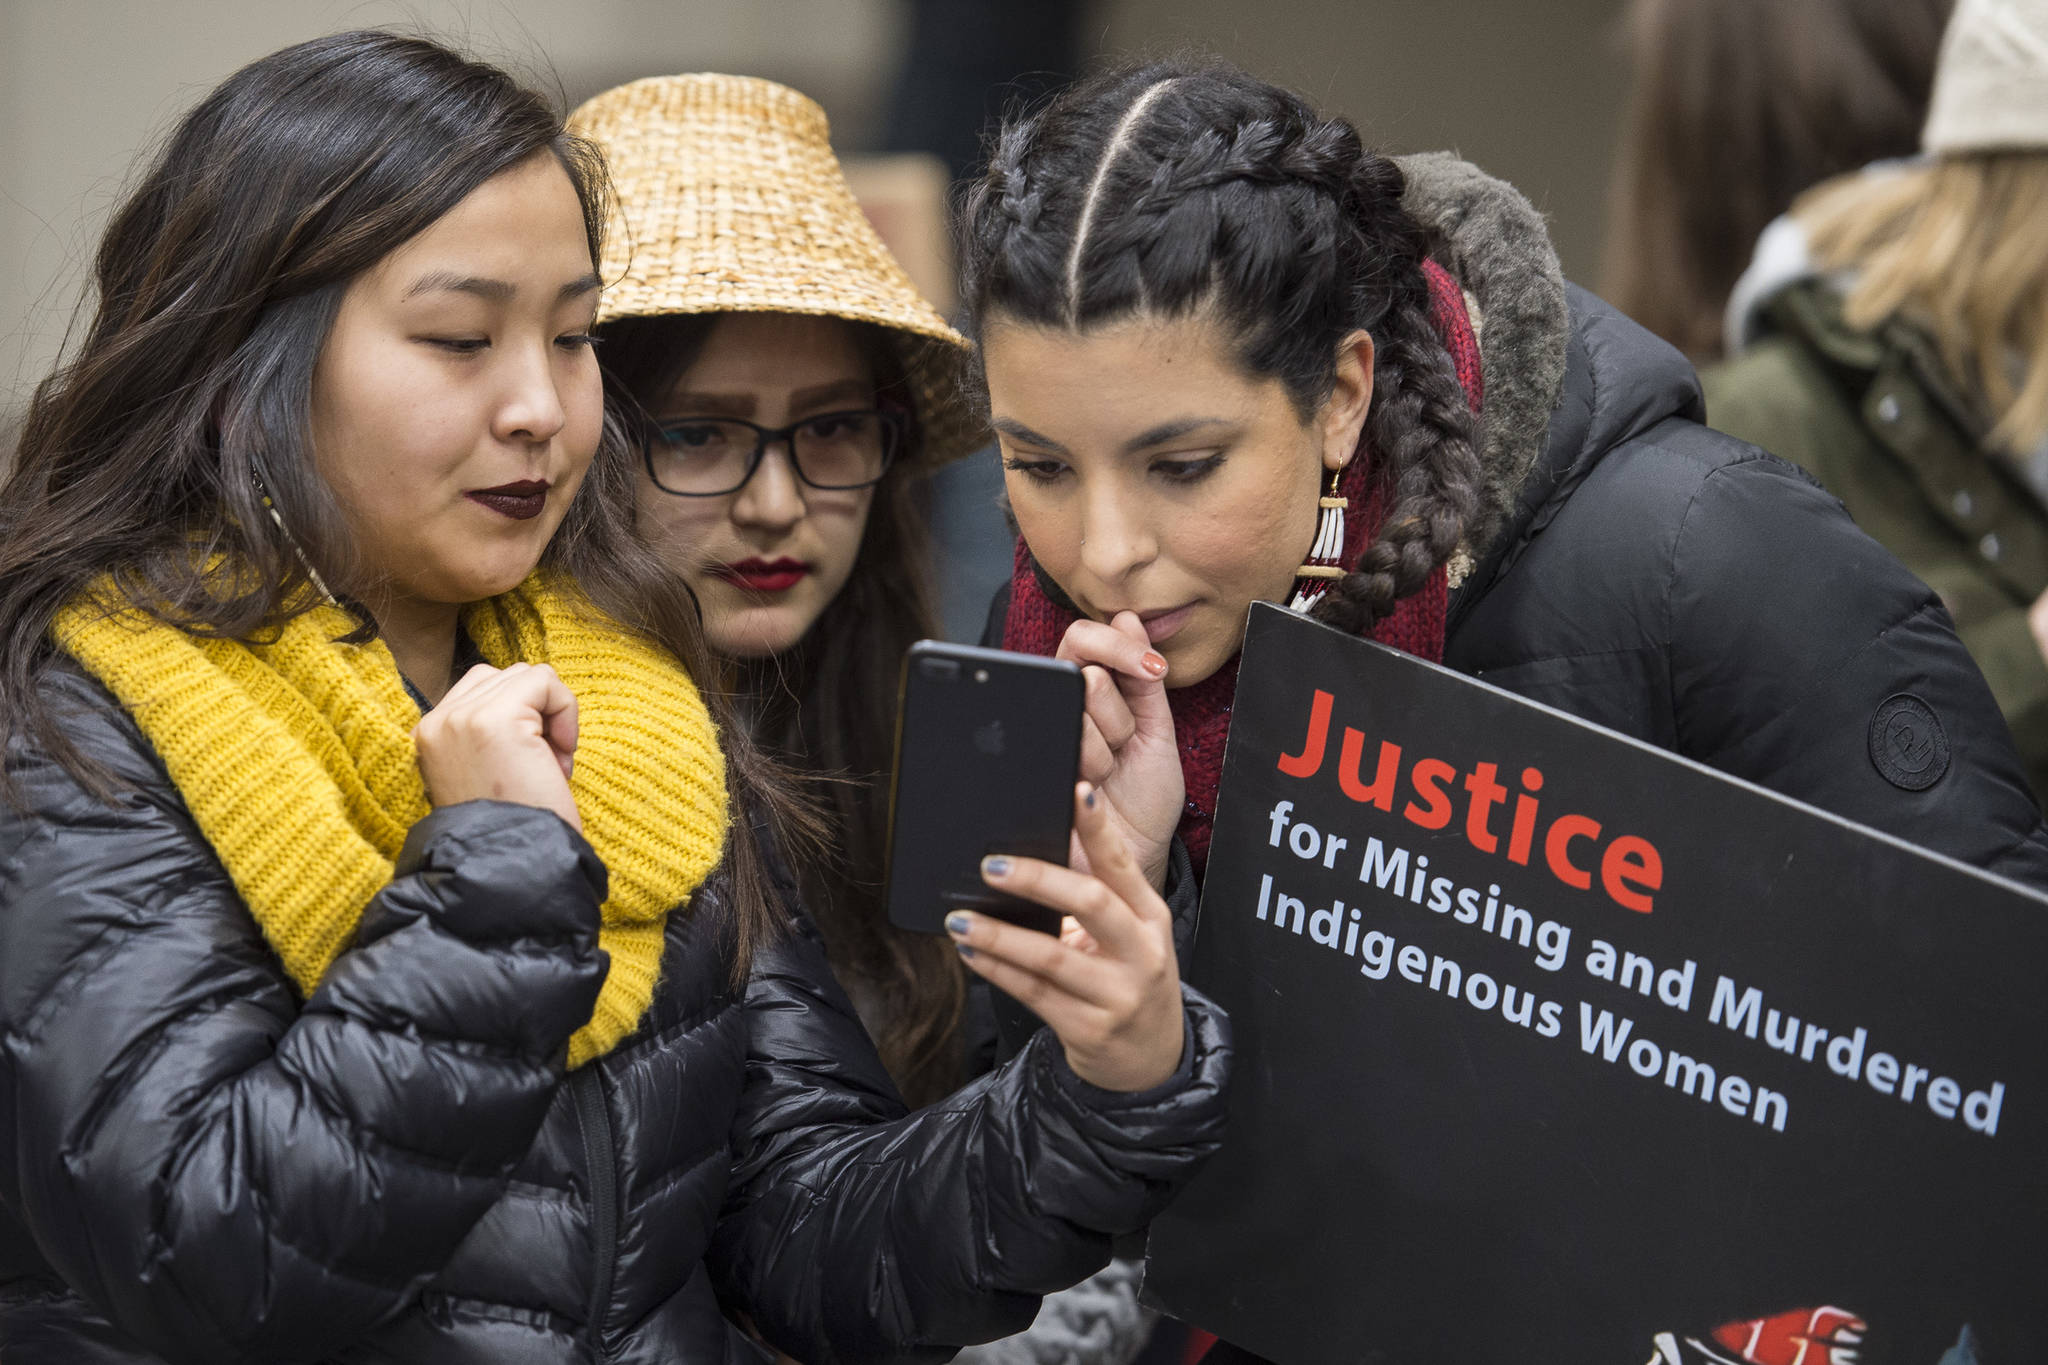 Laytlynne Lewis, left, Lyndsey Brollini, center, and Huynter Meachum check it after the Women’s March on Juneau at Centennial Hall on Saturday, Jan. 19, 2019. (Michael Penn | Juneau Empire)